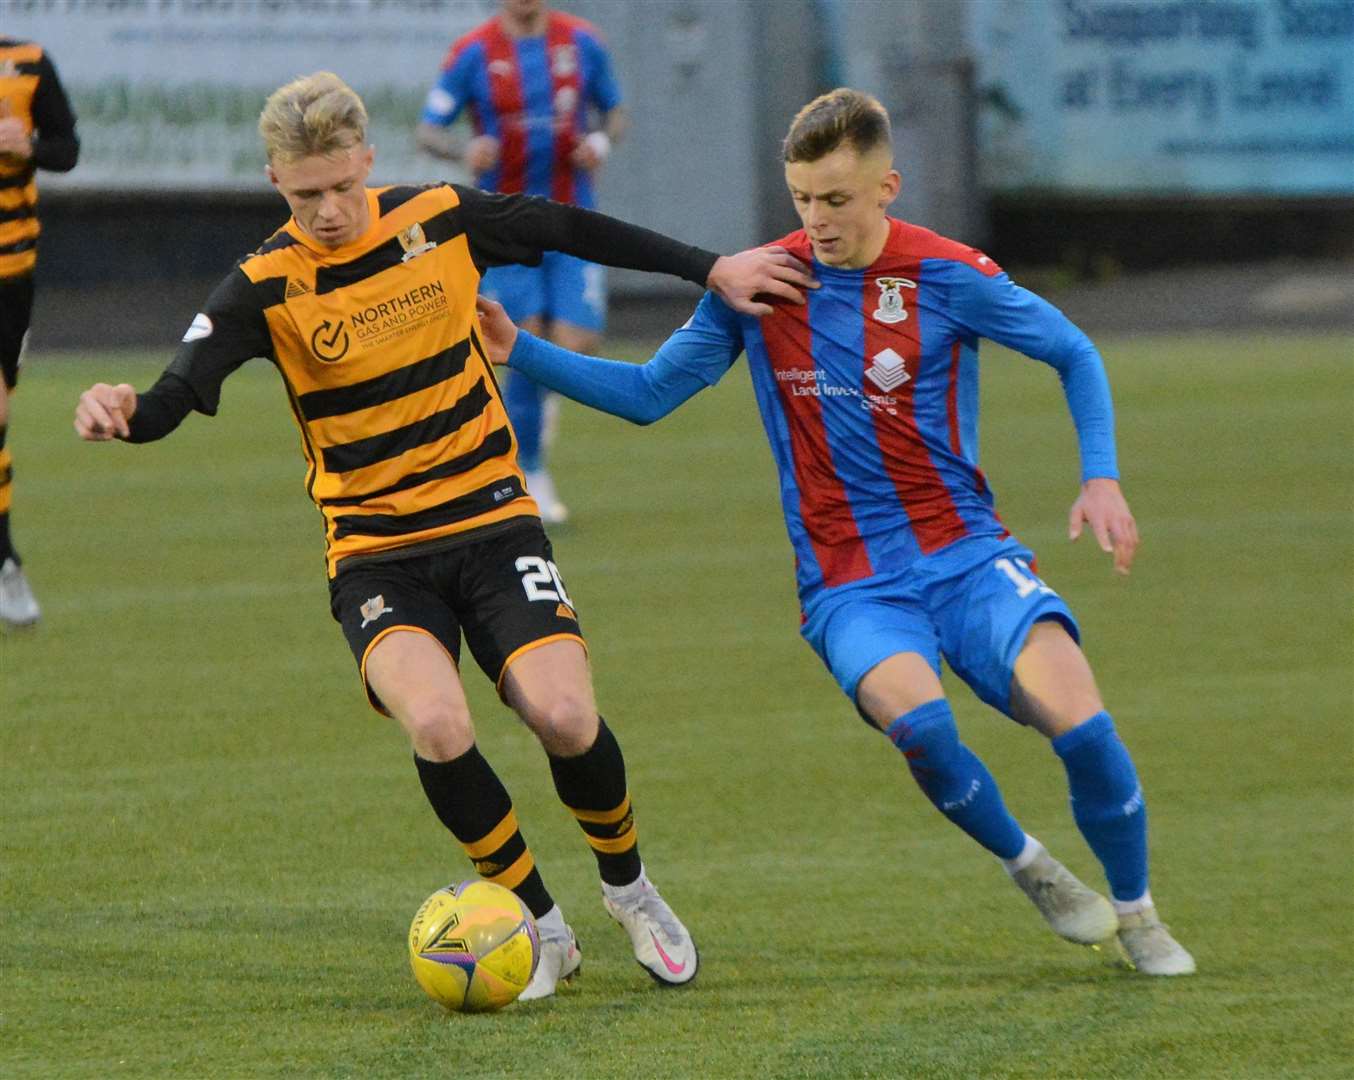 Inverness Caledonian Thistle forward Miles Storey closes down Alloa Athletic's Cameron O'Donnell.